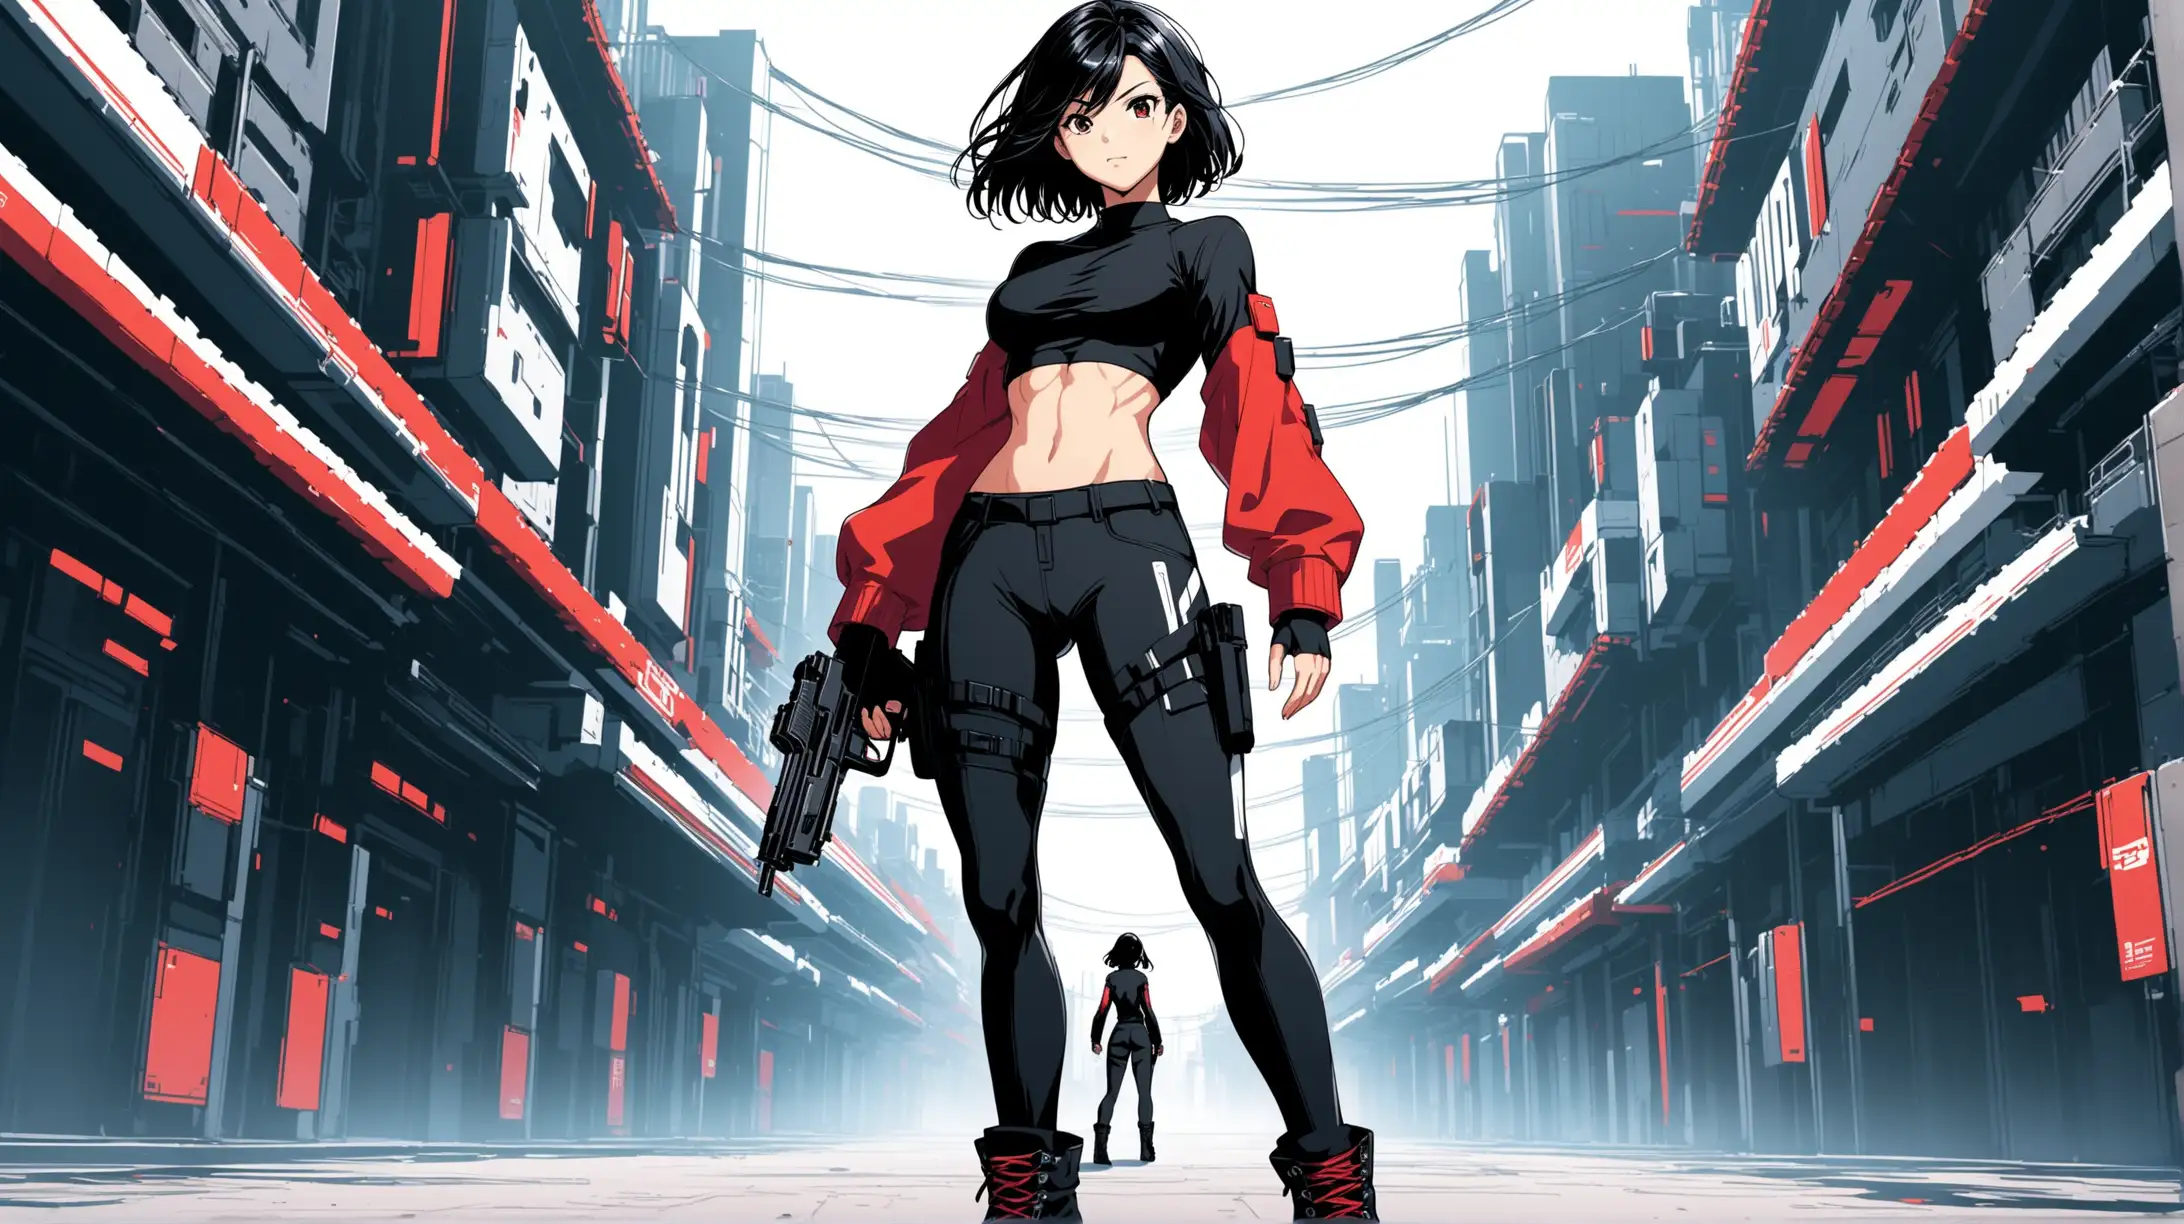 sexy fit 24 year old anime hero girl, short chin length black hair, handguns in each hand in futuristic town, toned body, long sleeve black t-shirt, black pants, combat boots, red black white 3 color minimal design